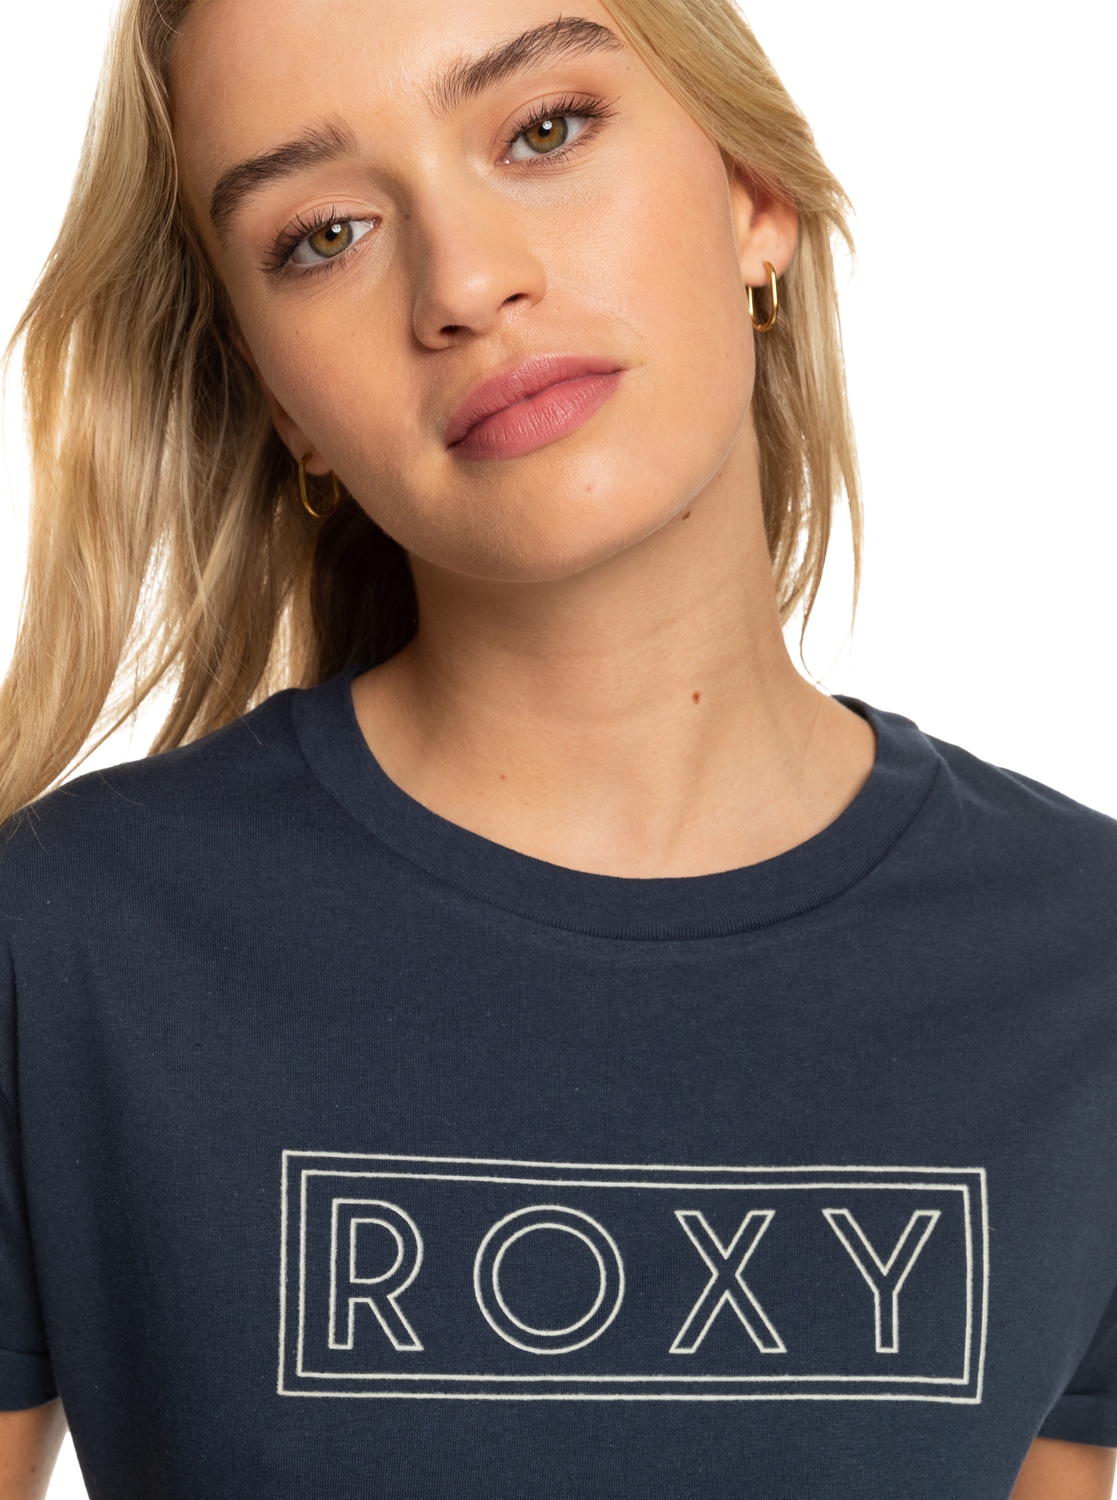 Roxy T-Shirt »Epic Afternoon«